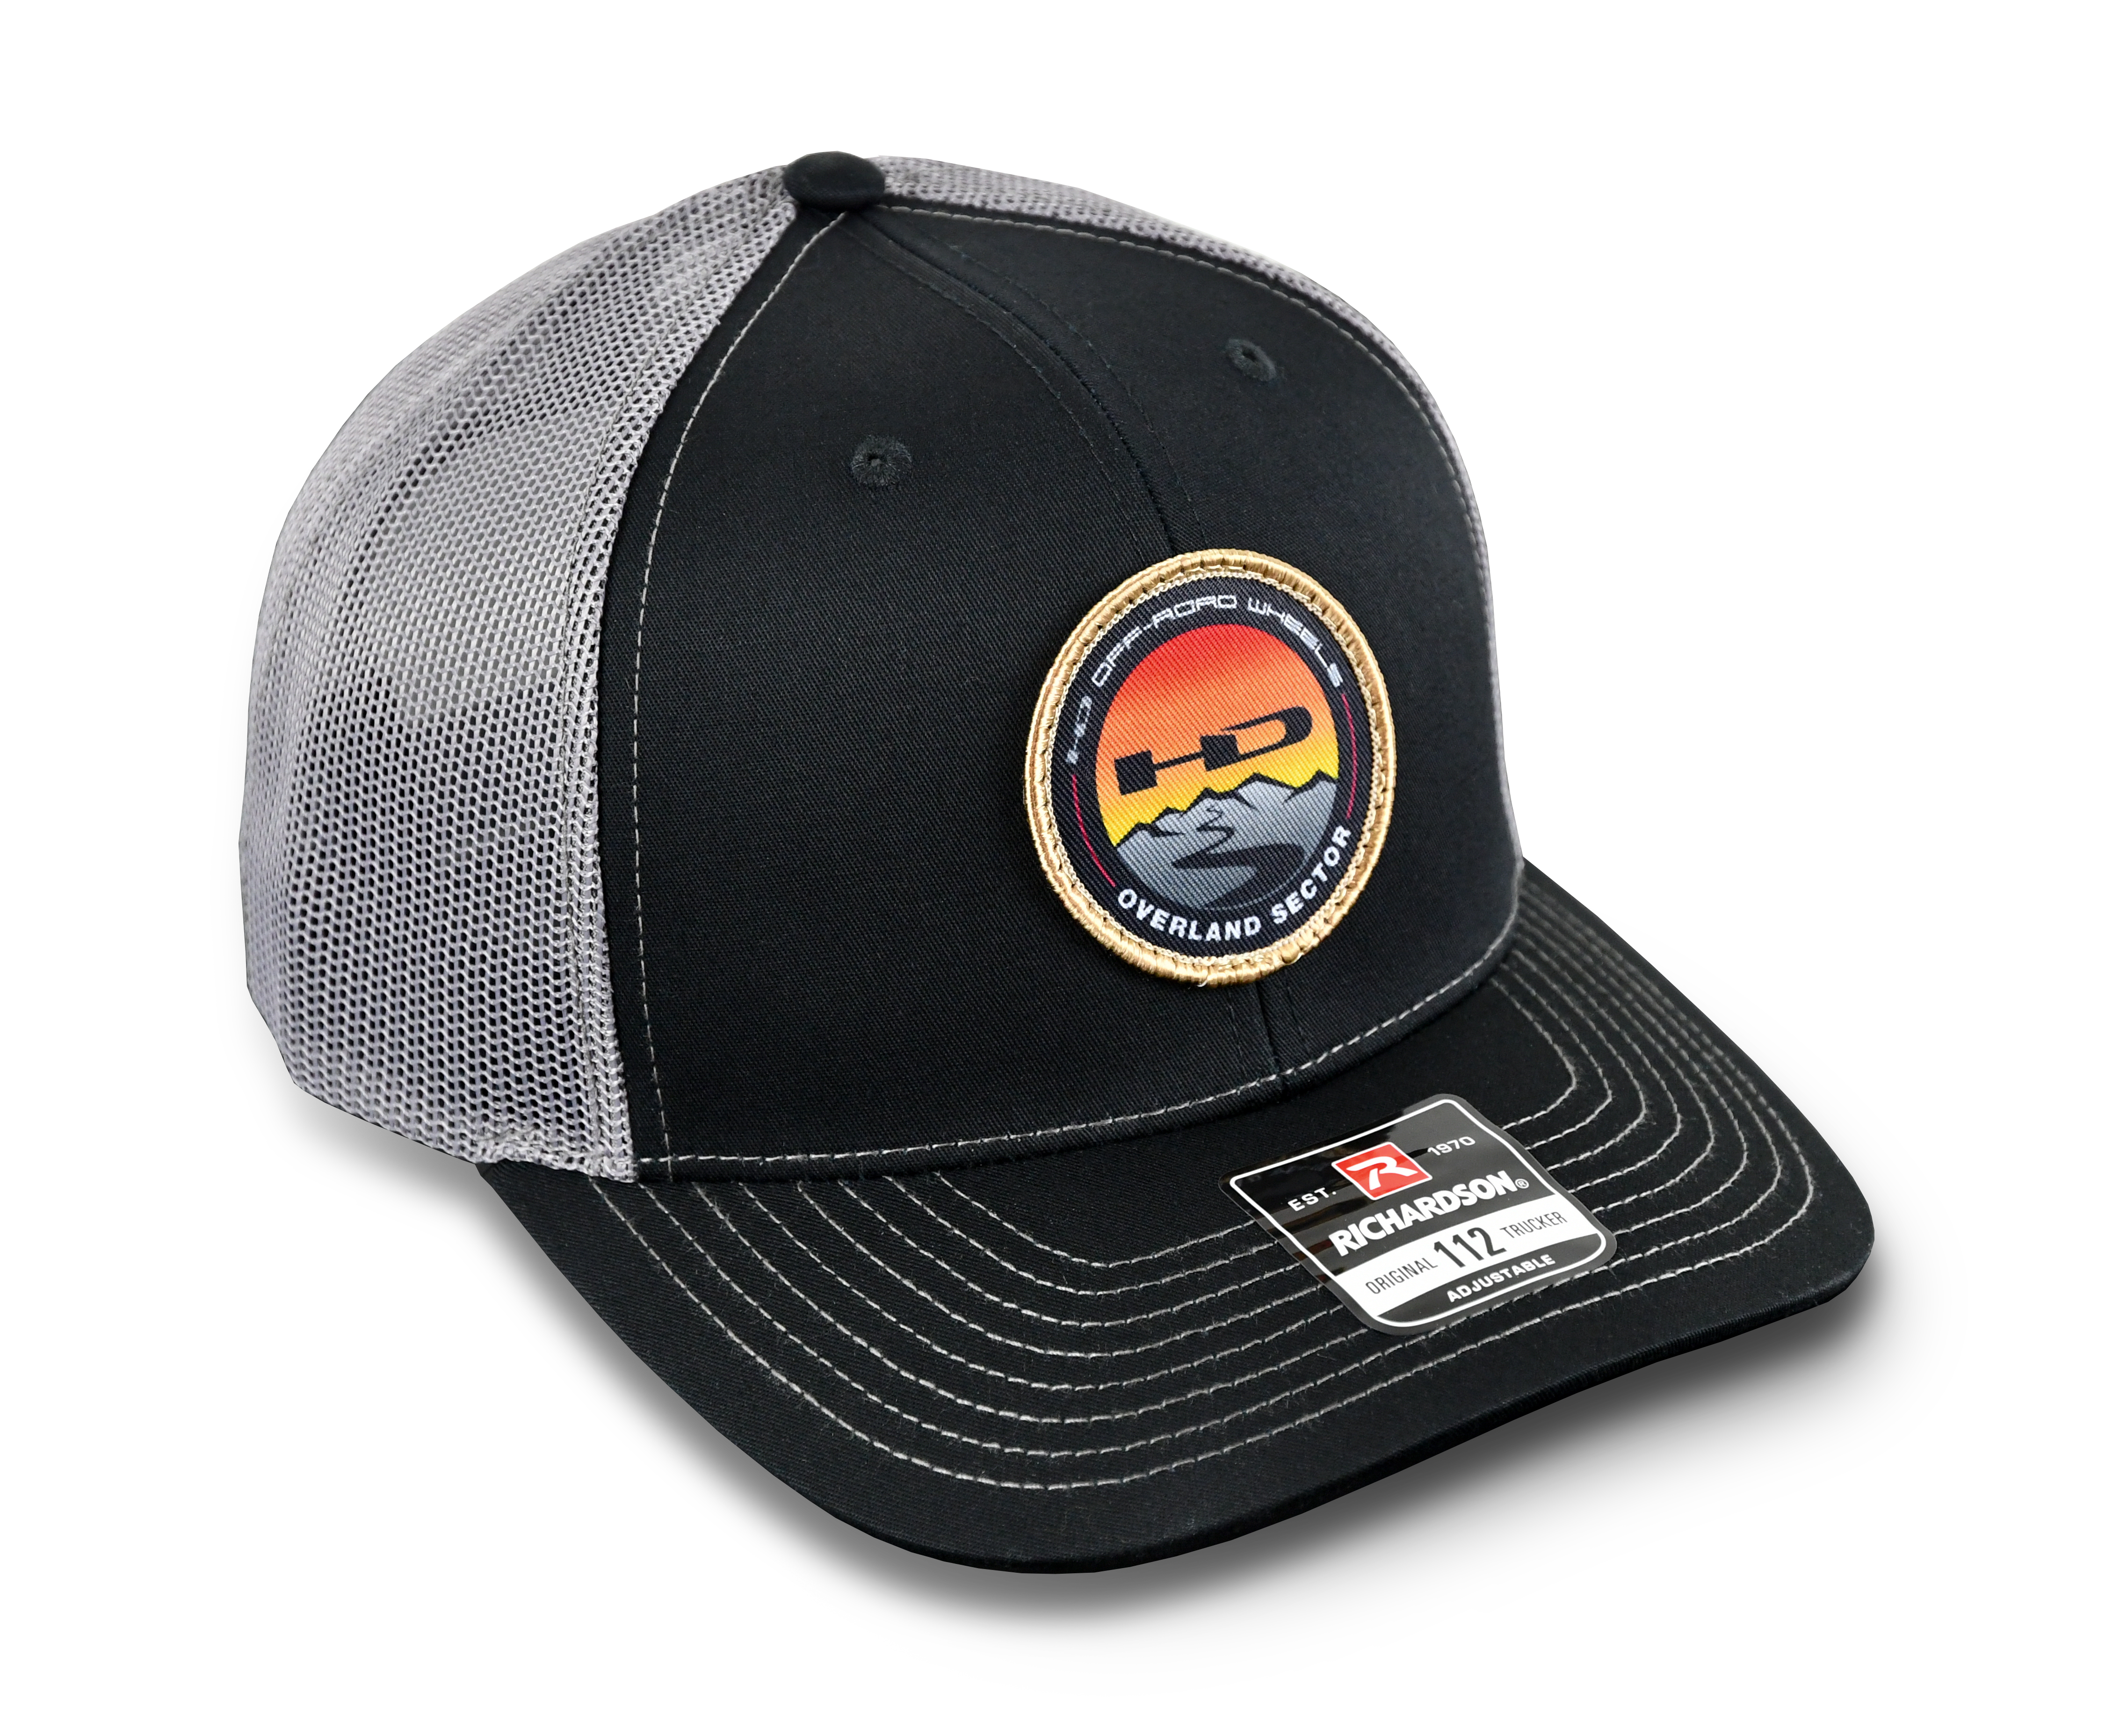 HD Off-Road Wheels Overland Sector Official Richardson 112 Snap Back Hat in Black & White Trucker Style with Mesh Back